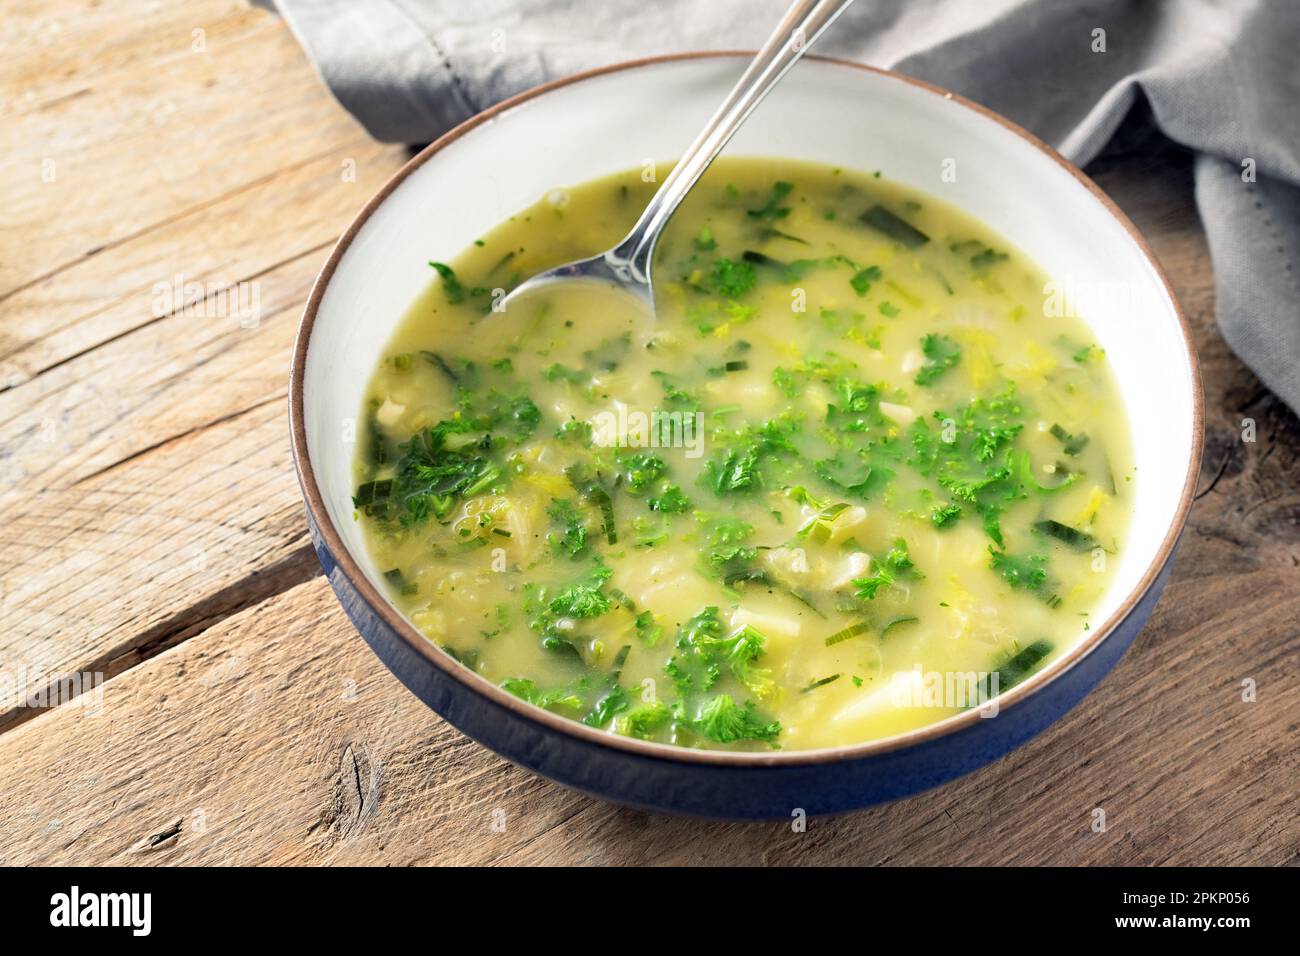 Potato parsley soup in a plate with spoon on a rustic wooden table, healthy vegetarian dish, copy space, selected focus, narrow depth of field Stock Photo